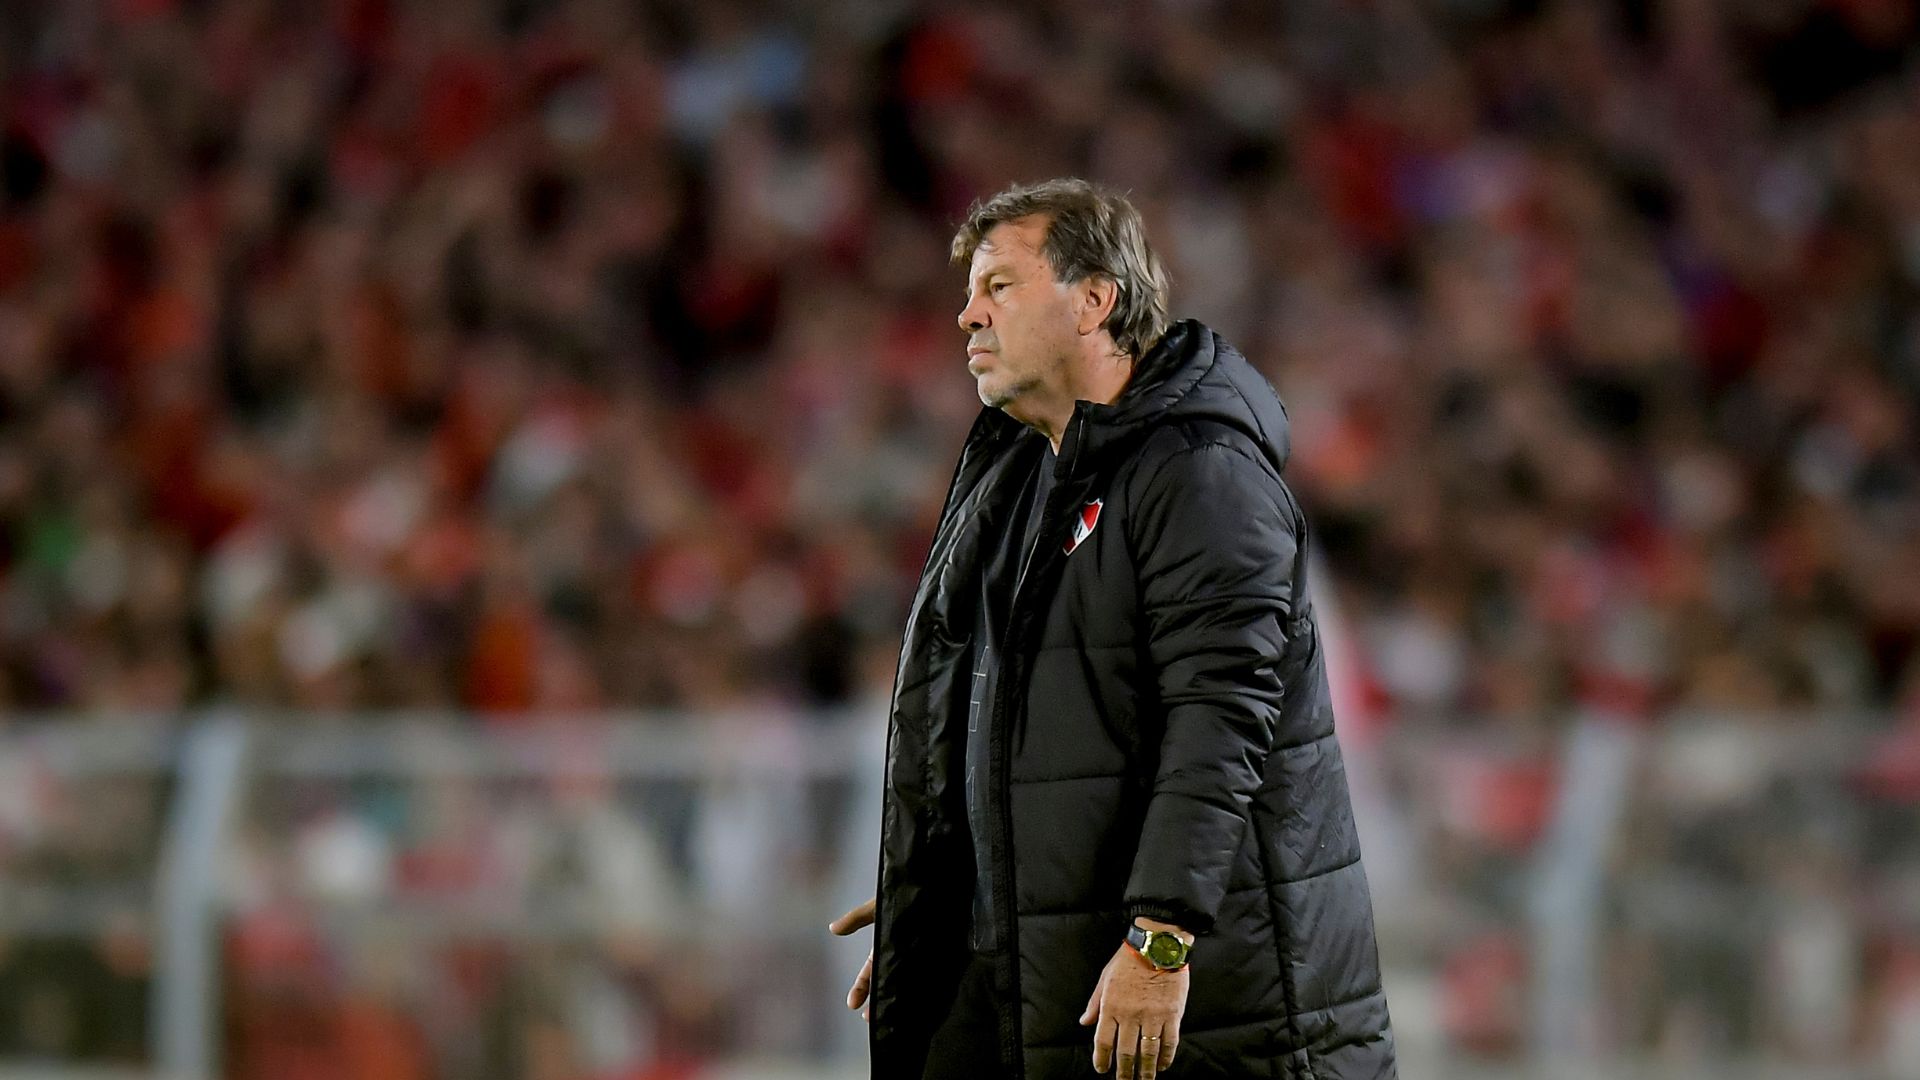 Ricardo Zielinski, coach of Independiente, against River Plate (Credit: Getty Images)